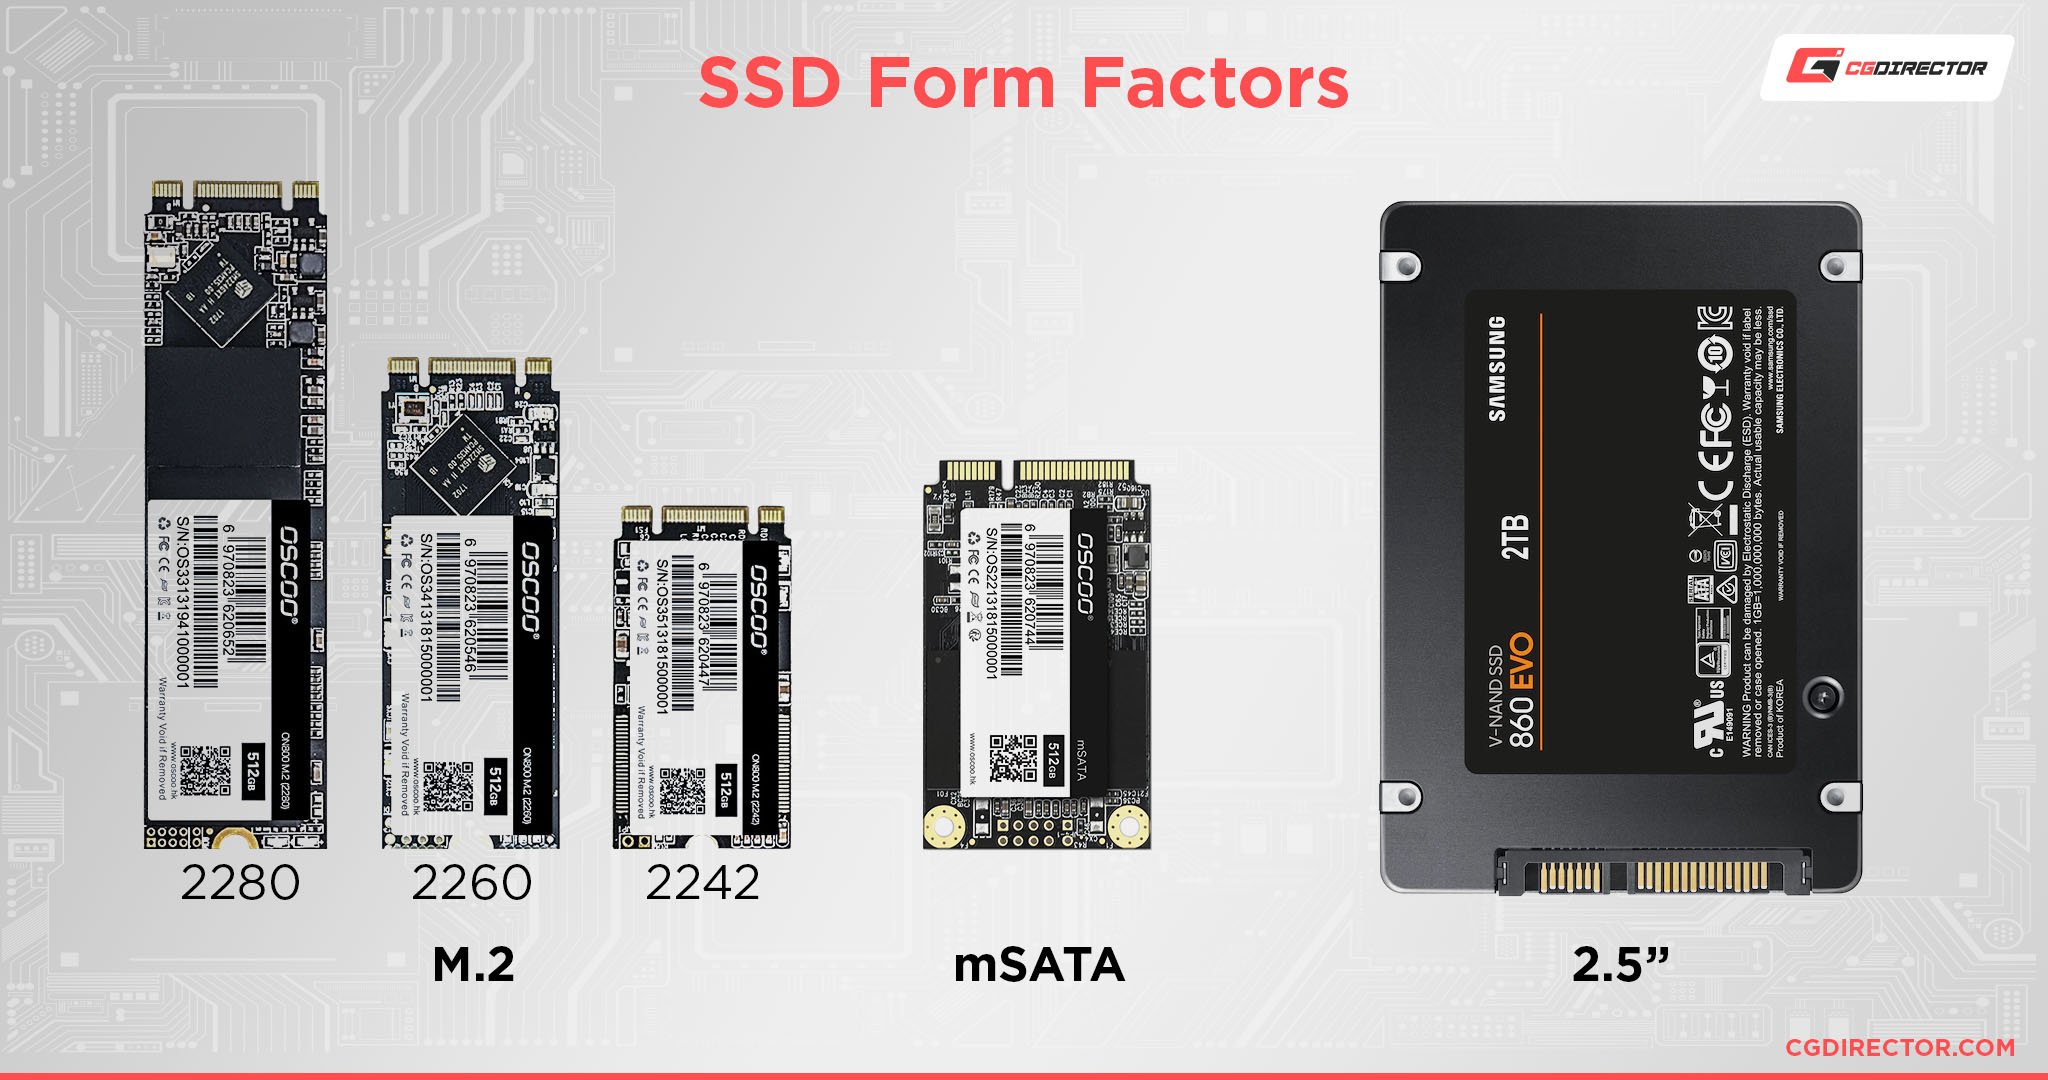 Nvme Sata Ssd Explained Whats The Differences 4528